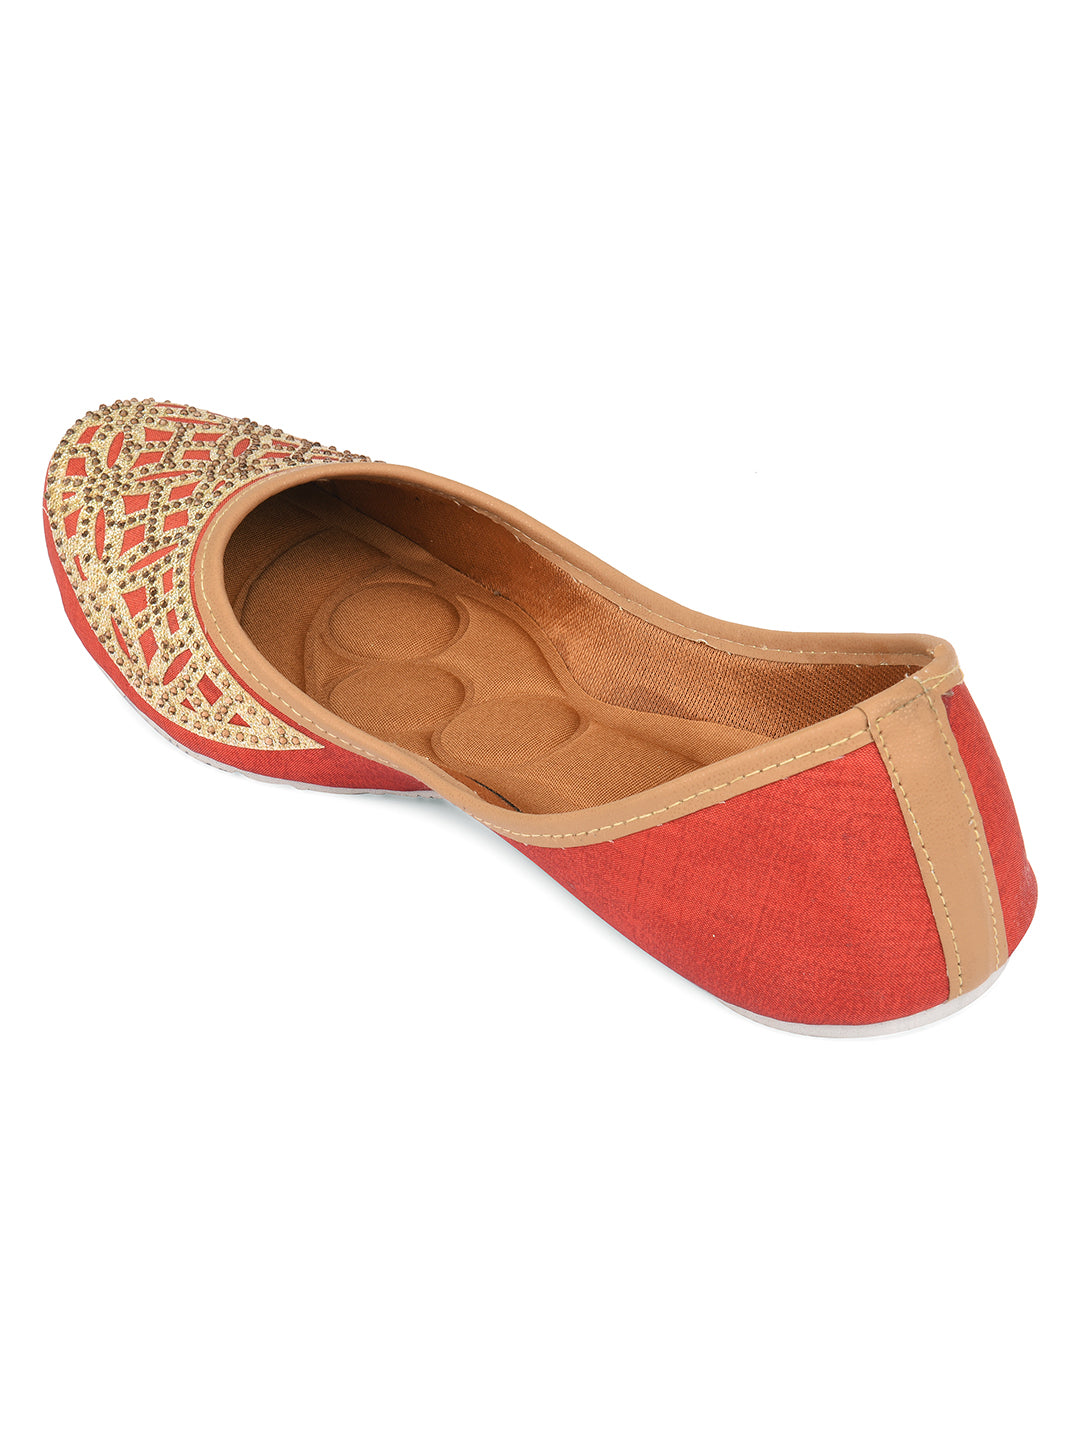 DESI COLOUR Women Red Embellished Mojaris with Laser Cuts Flats